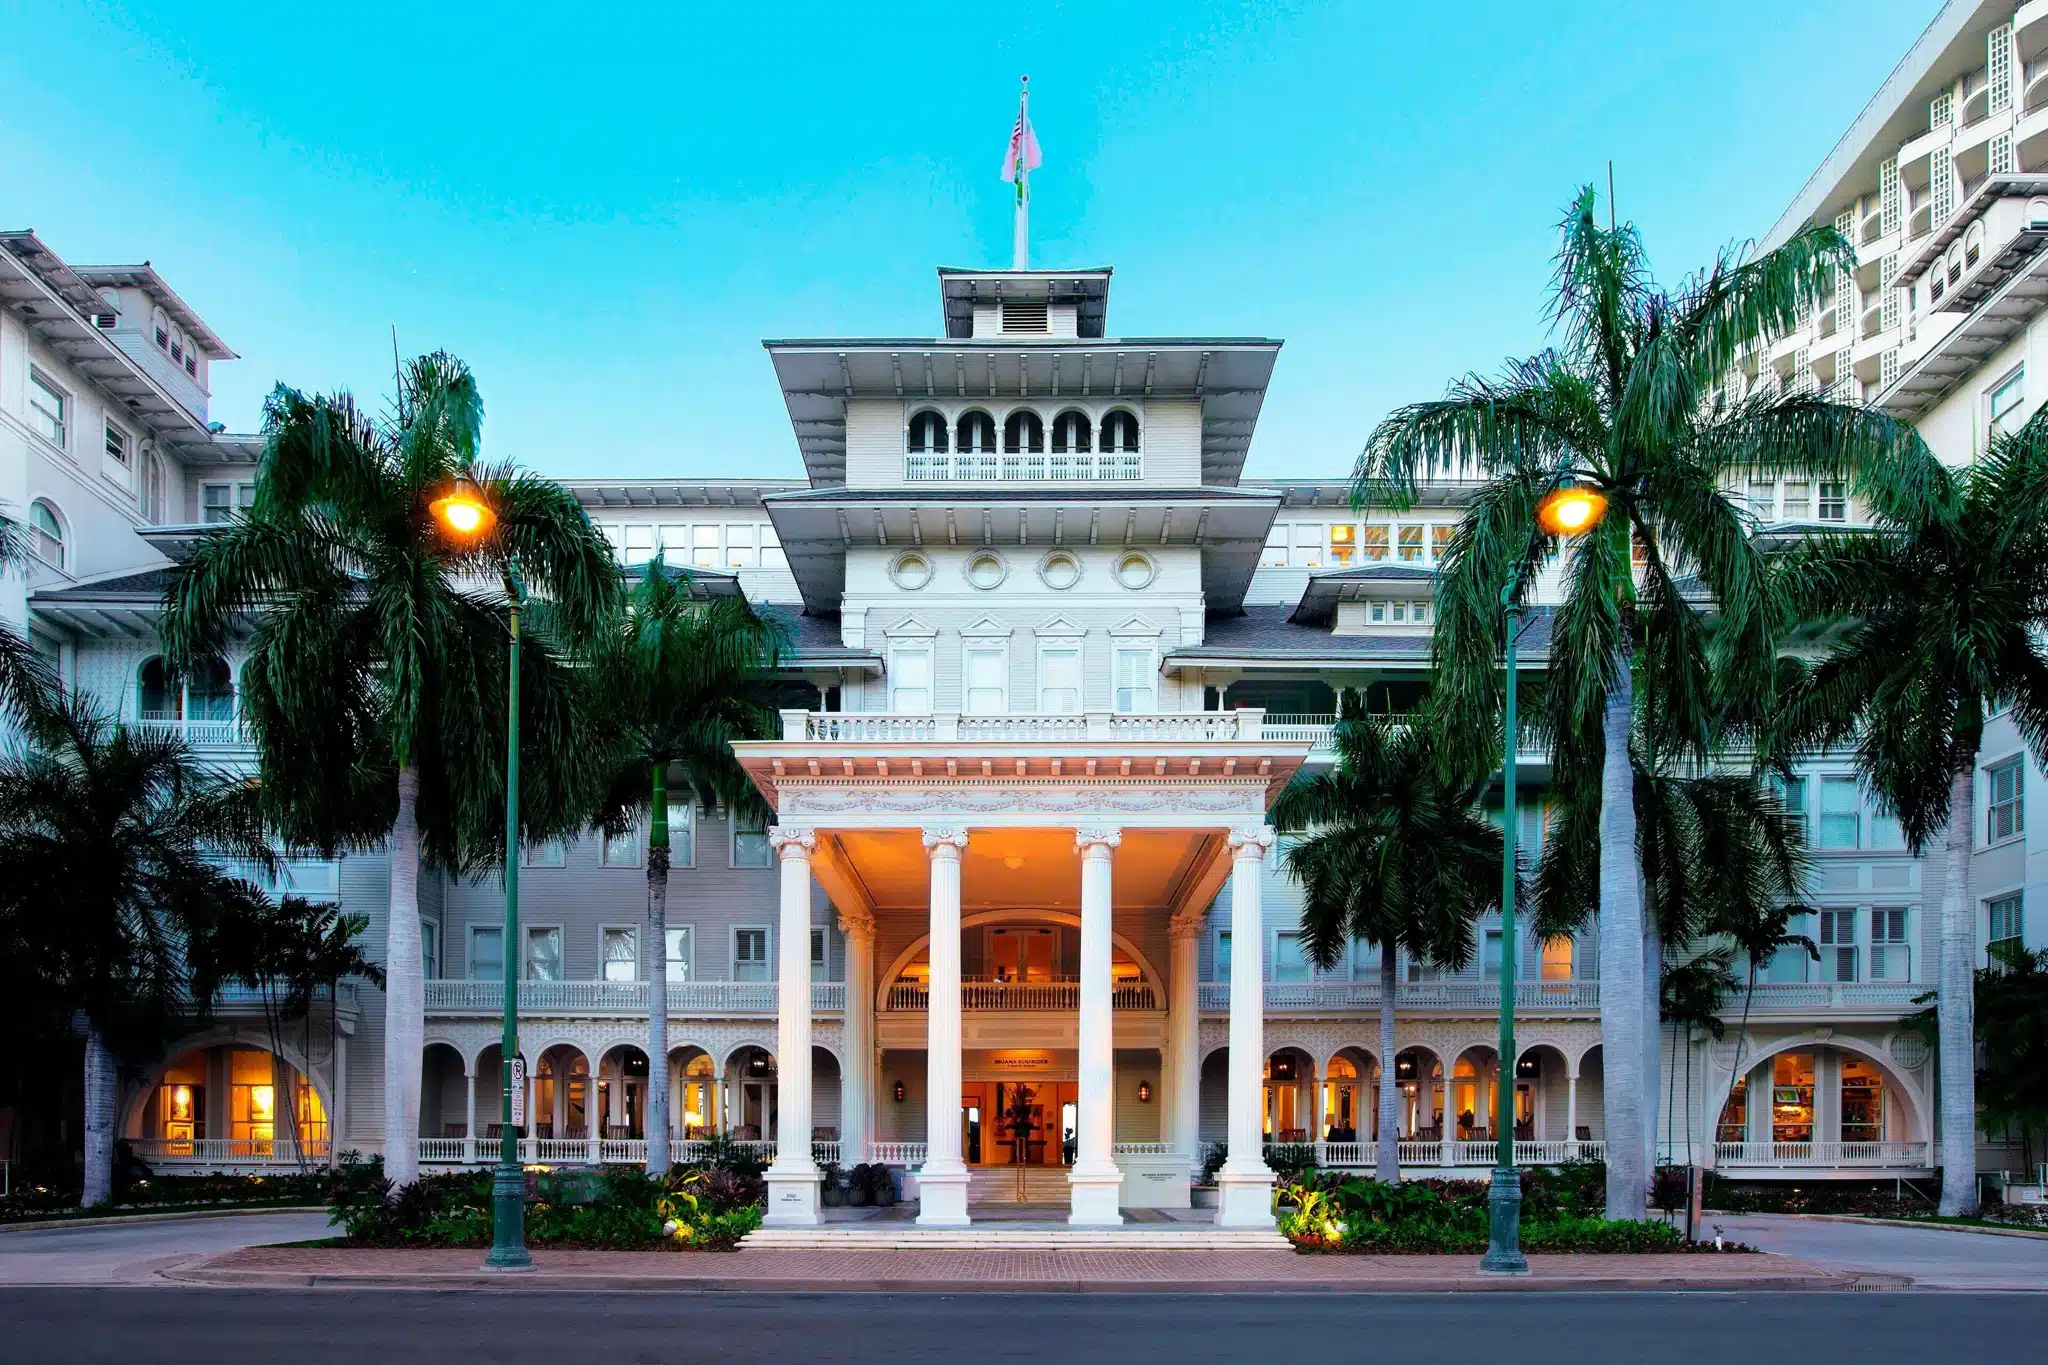 Moana Surfrider Resort & Spa by Westin is a Hotel located in the city of Honolulu on Oahu, Hawaii